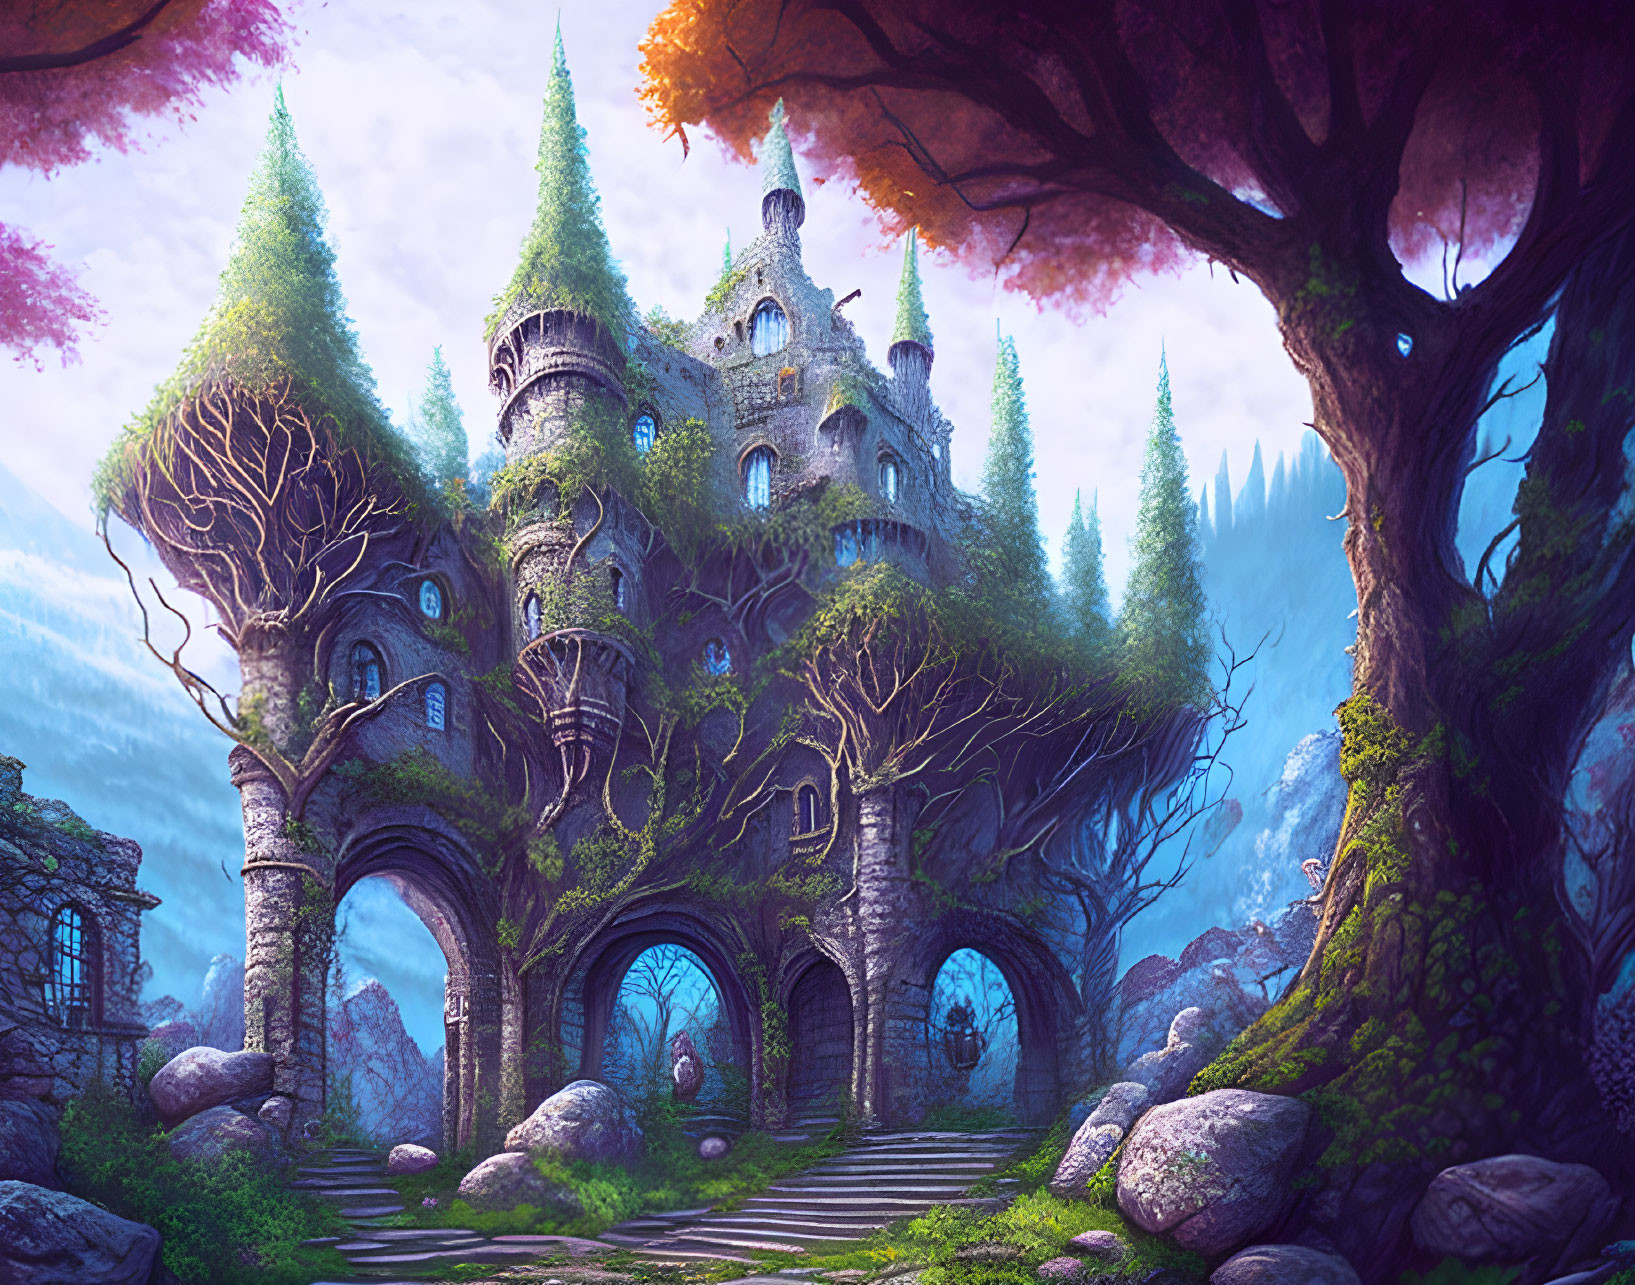 Whimsical castle surrounded by trees, stones, and lush vegetation